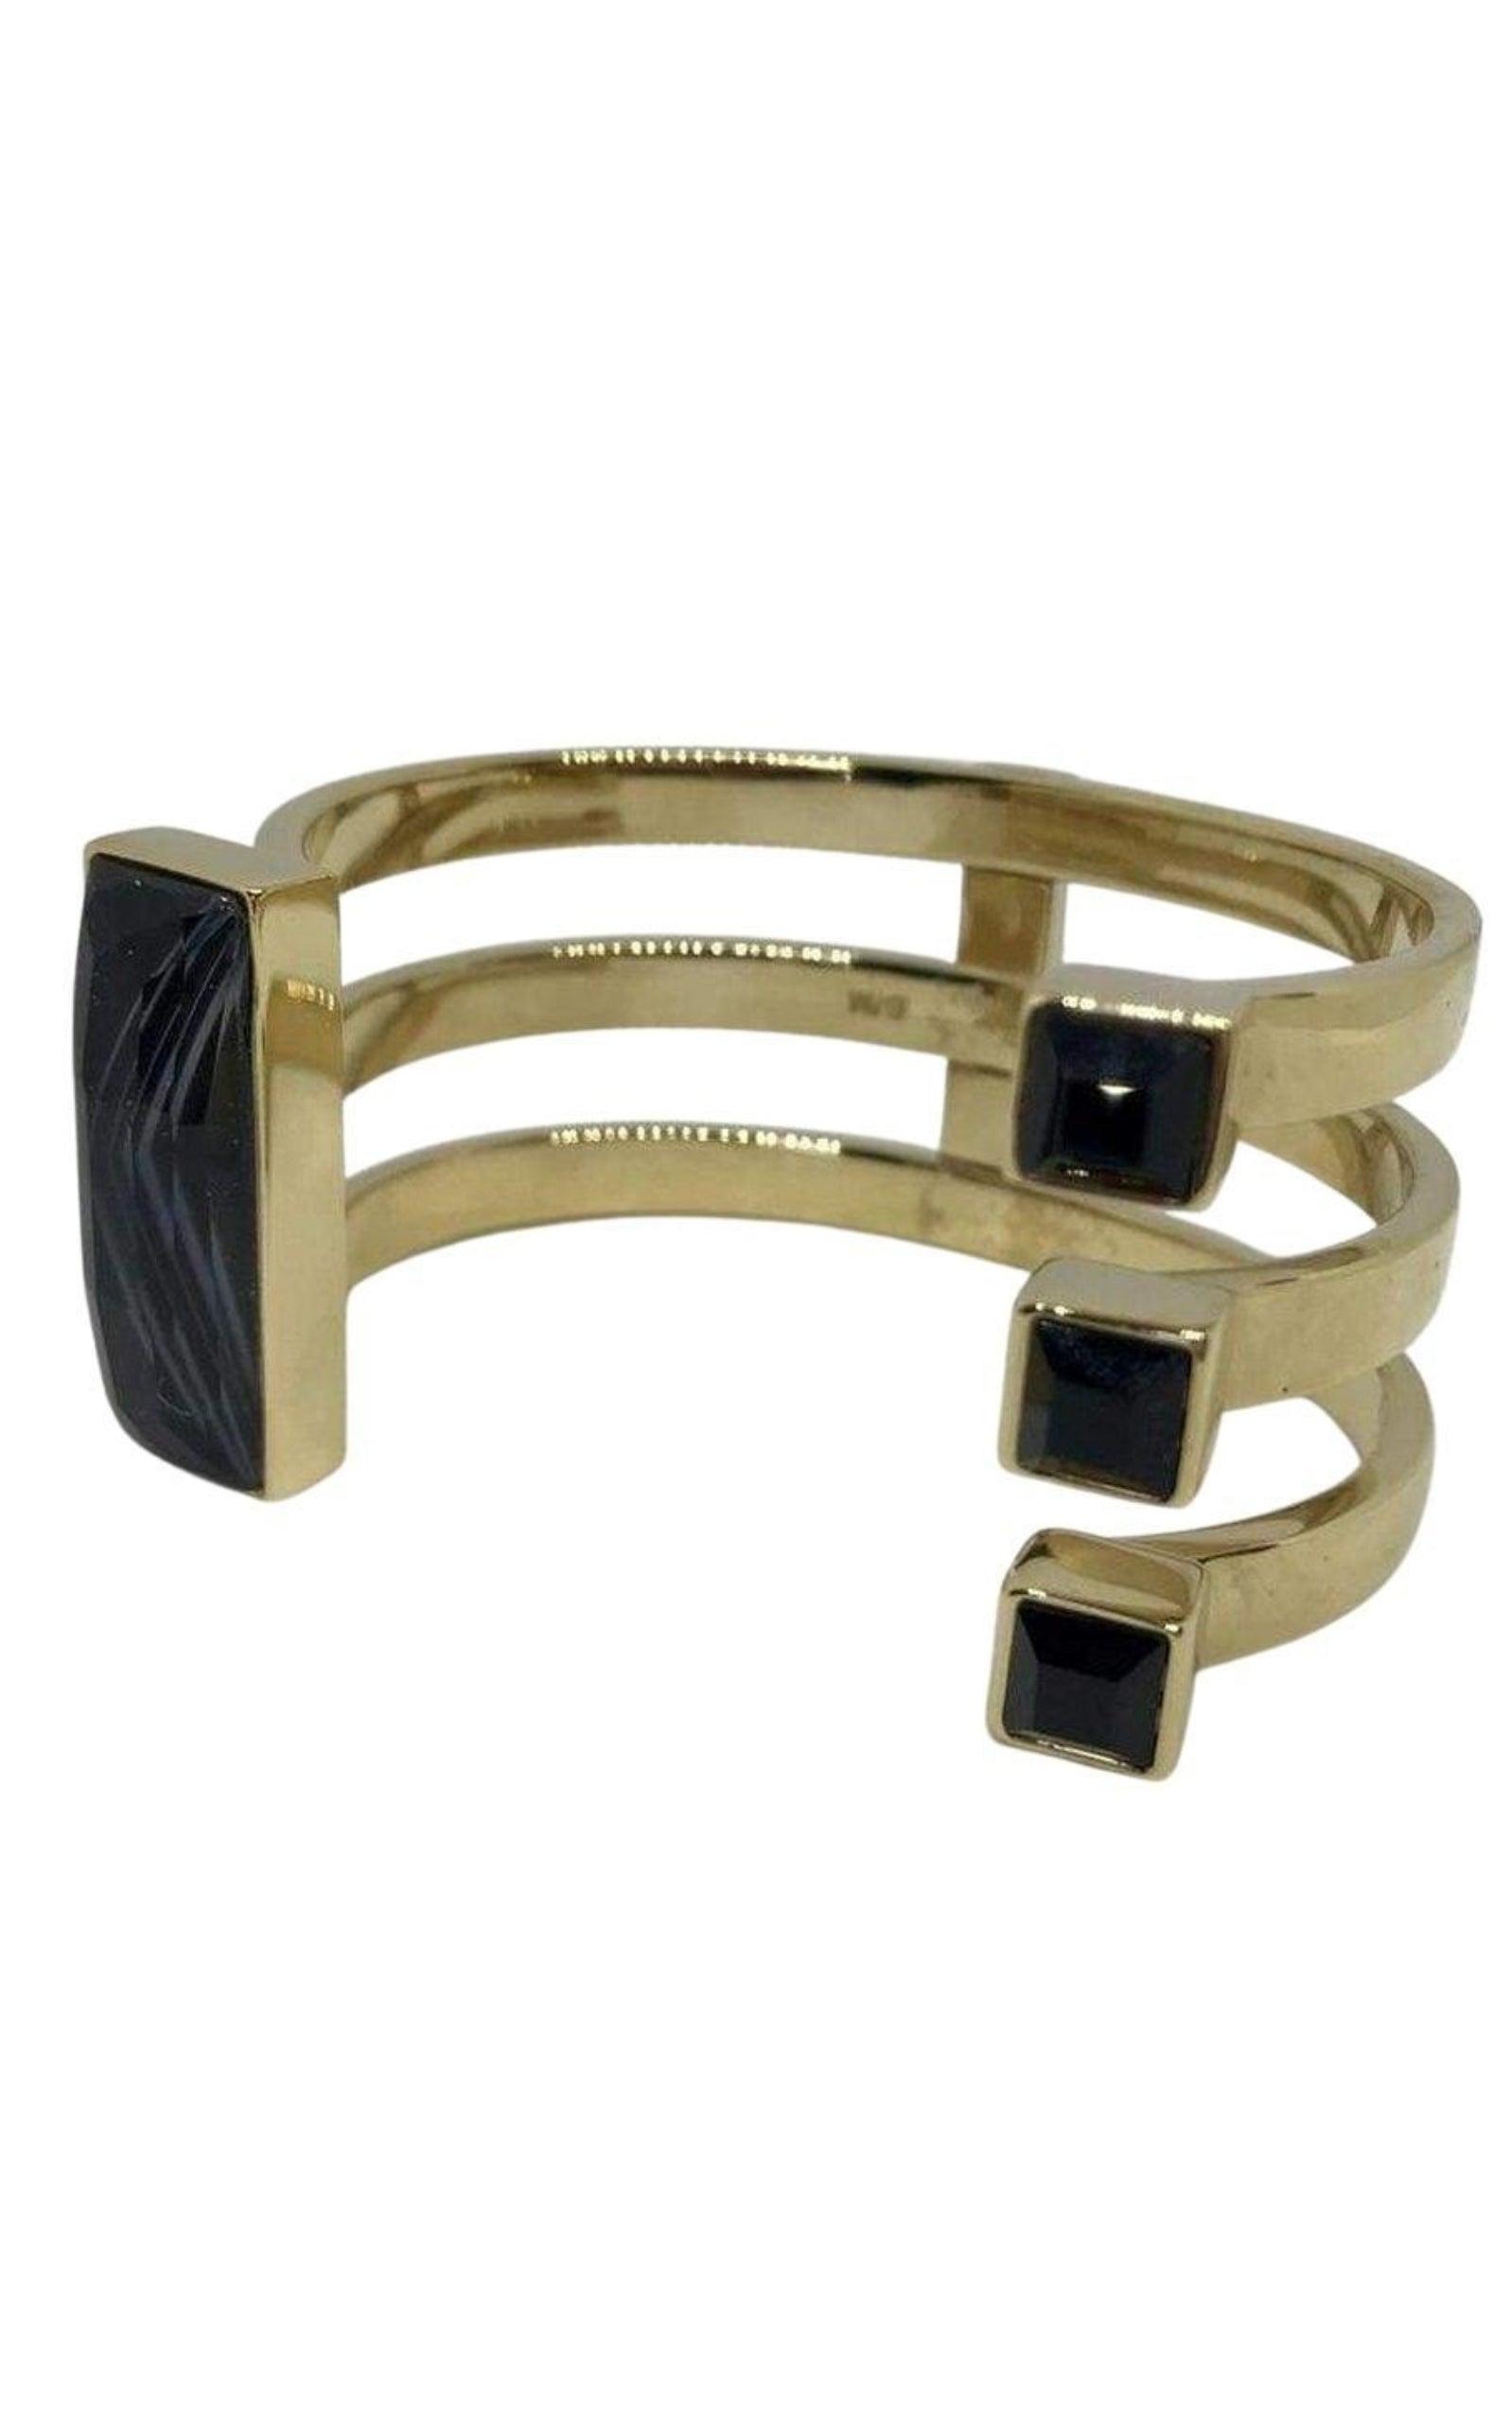 Handmade Belt 14k Solid Gold Buckle with Mother of Pearl/ Onyx